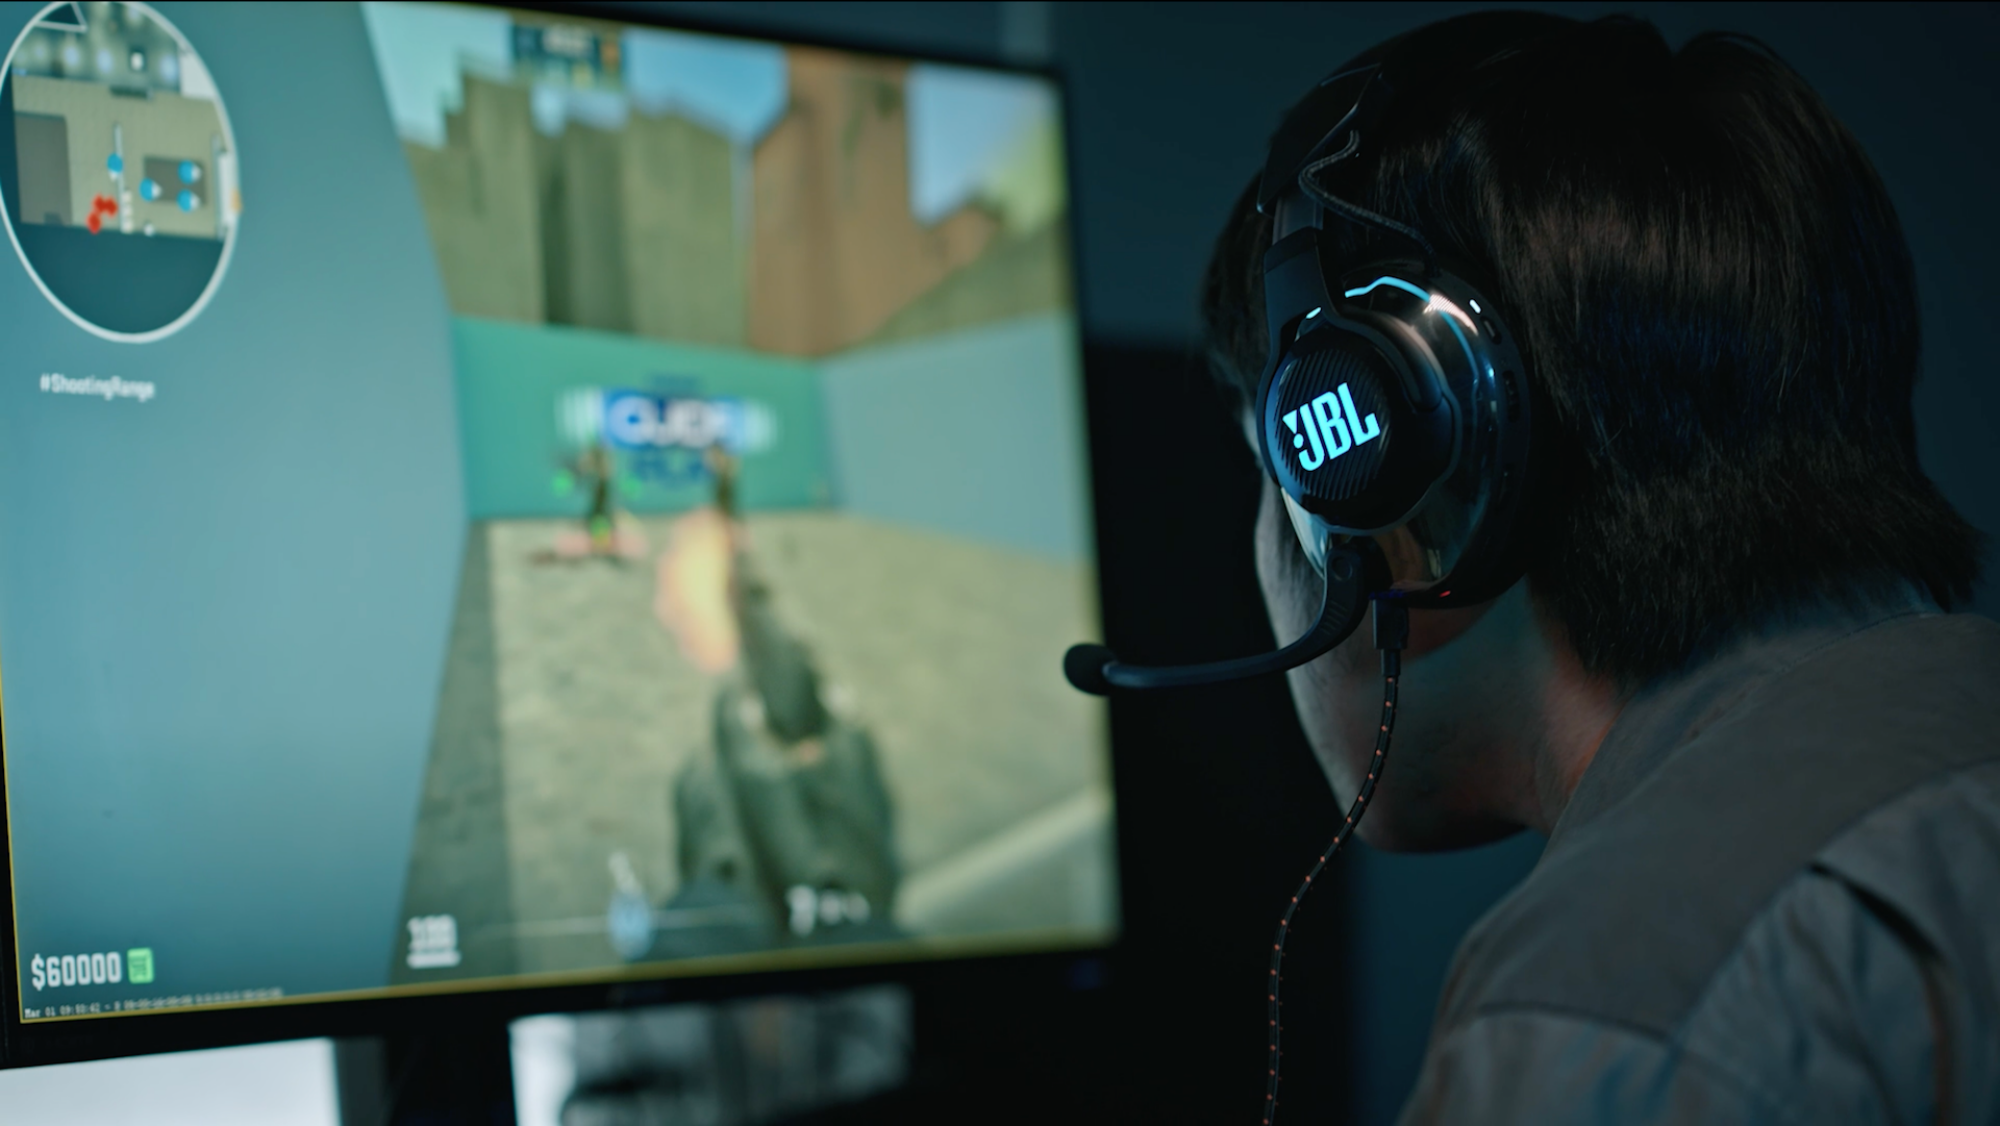 A gamer with JBL headphones plays a first person shooter.